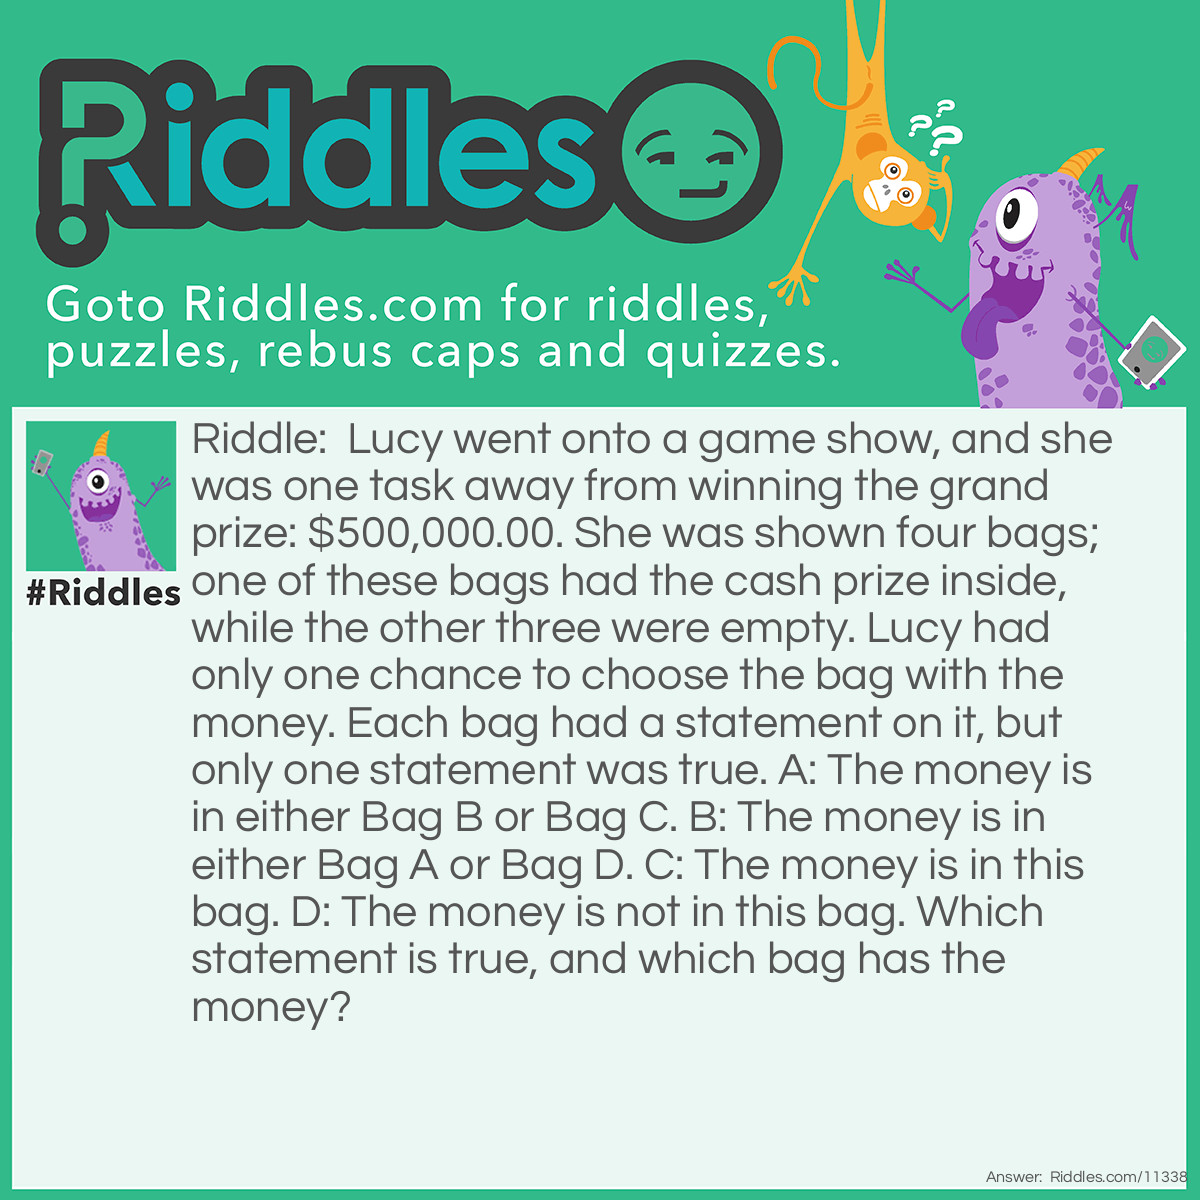 Riddle: Lucy went onto a game show, and she was one task away from winning the grand prize: $500,000.00. She was shown four bags; one of these bags had the cash prize inside, while the other three were empty. Lucy had only one chance to choose the bag with the money. Each bag had a statement on it, but only one statement was true. A: The money is in either Bag B or Bag C. B: The money is in either Bag A or Bag D. C: The money is in this bag. D: The money is not in this bag. Which statement is true, and which bag has the money? Answer: Statement B is true. Bag D has the money. If Bag A had the money, then statements B and D would both be true. If Bag B had the money, then statements A and D would both be true. If Bag C had the money, then statements A, C, and D would all be true. But, we only need one true statement. If Bag D had the money, then the statements on all of the bags would be false, except for that on Bag B. This matches the conditions, so the money is in Bag D.